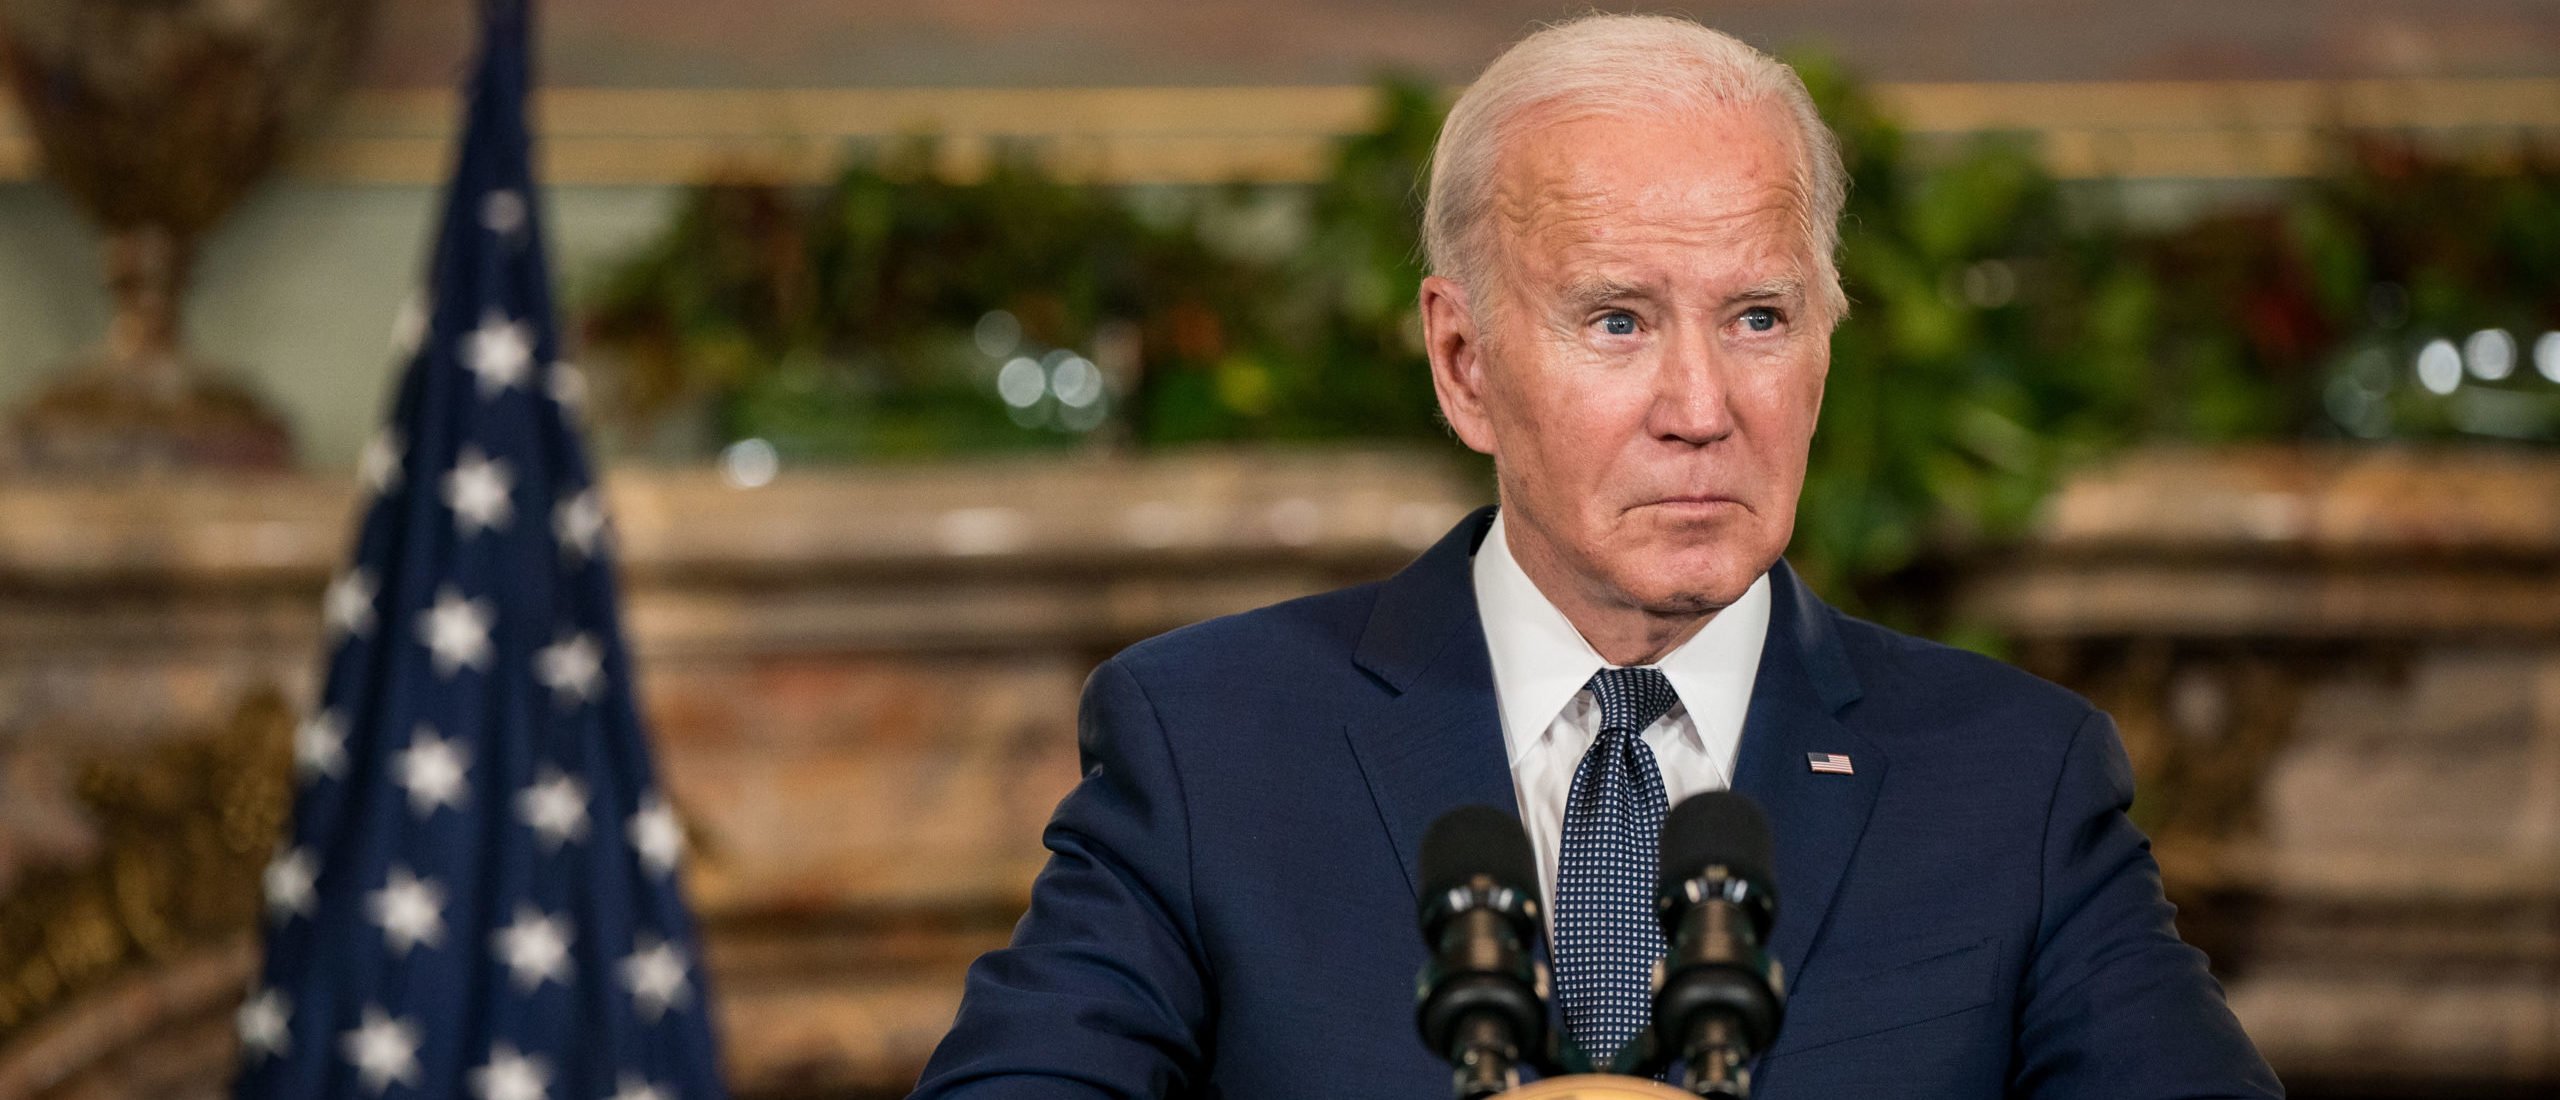 Things Are Going From Bad To Worse For Joe Biden, Polls Show